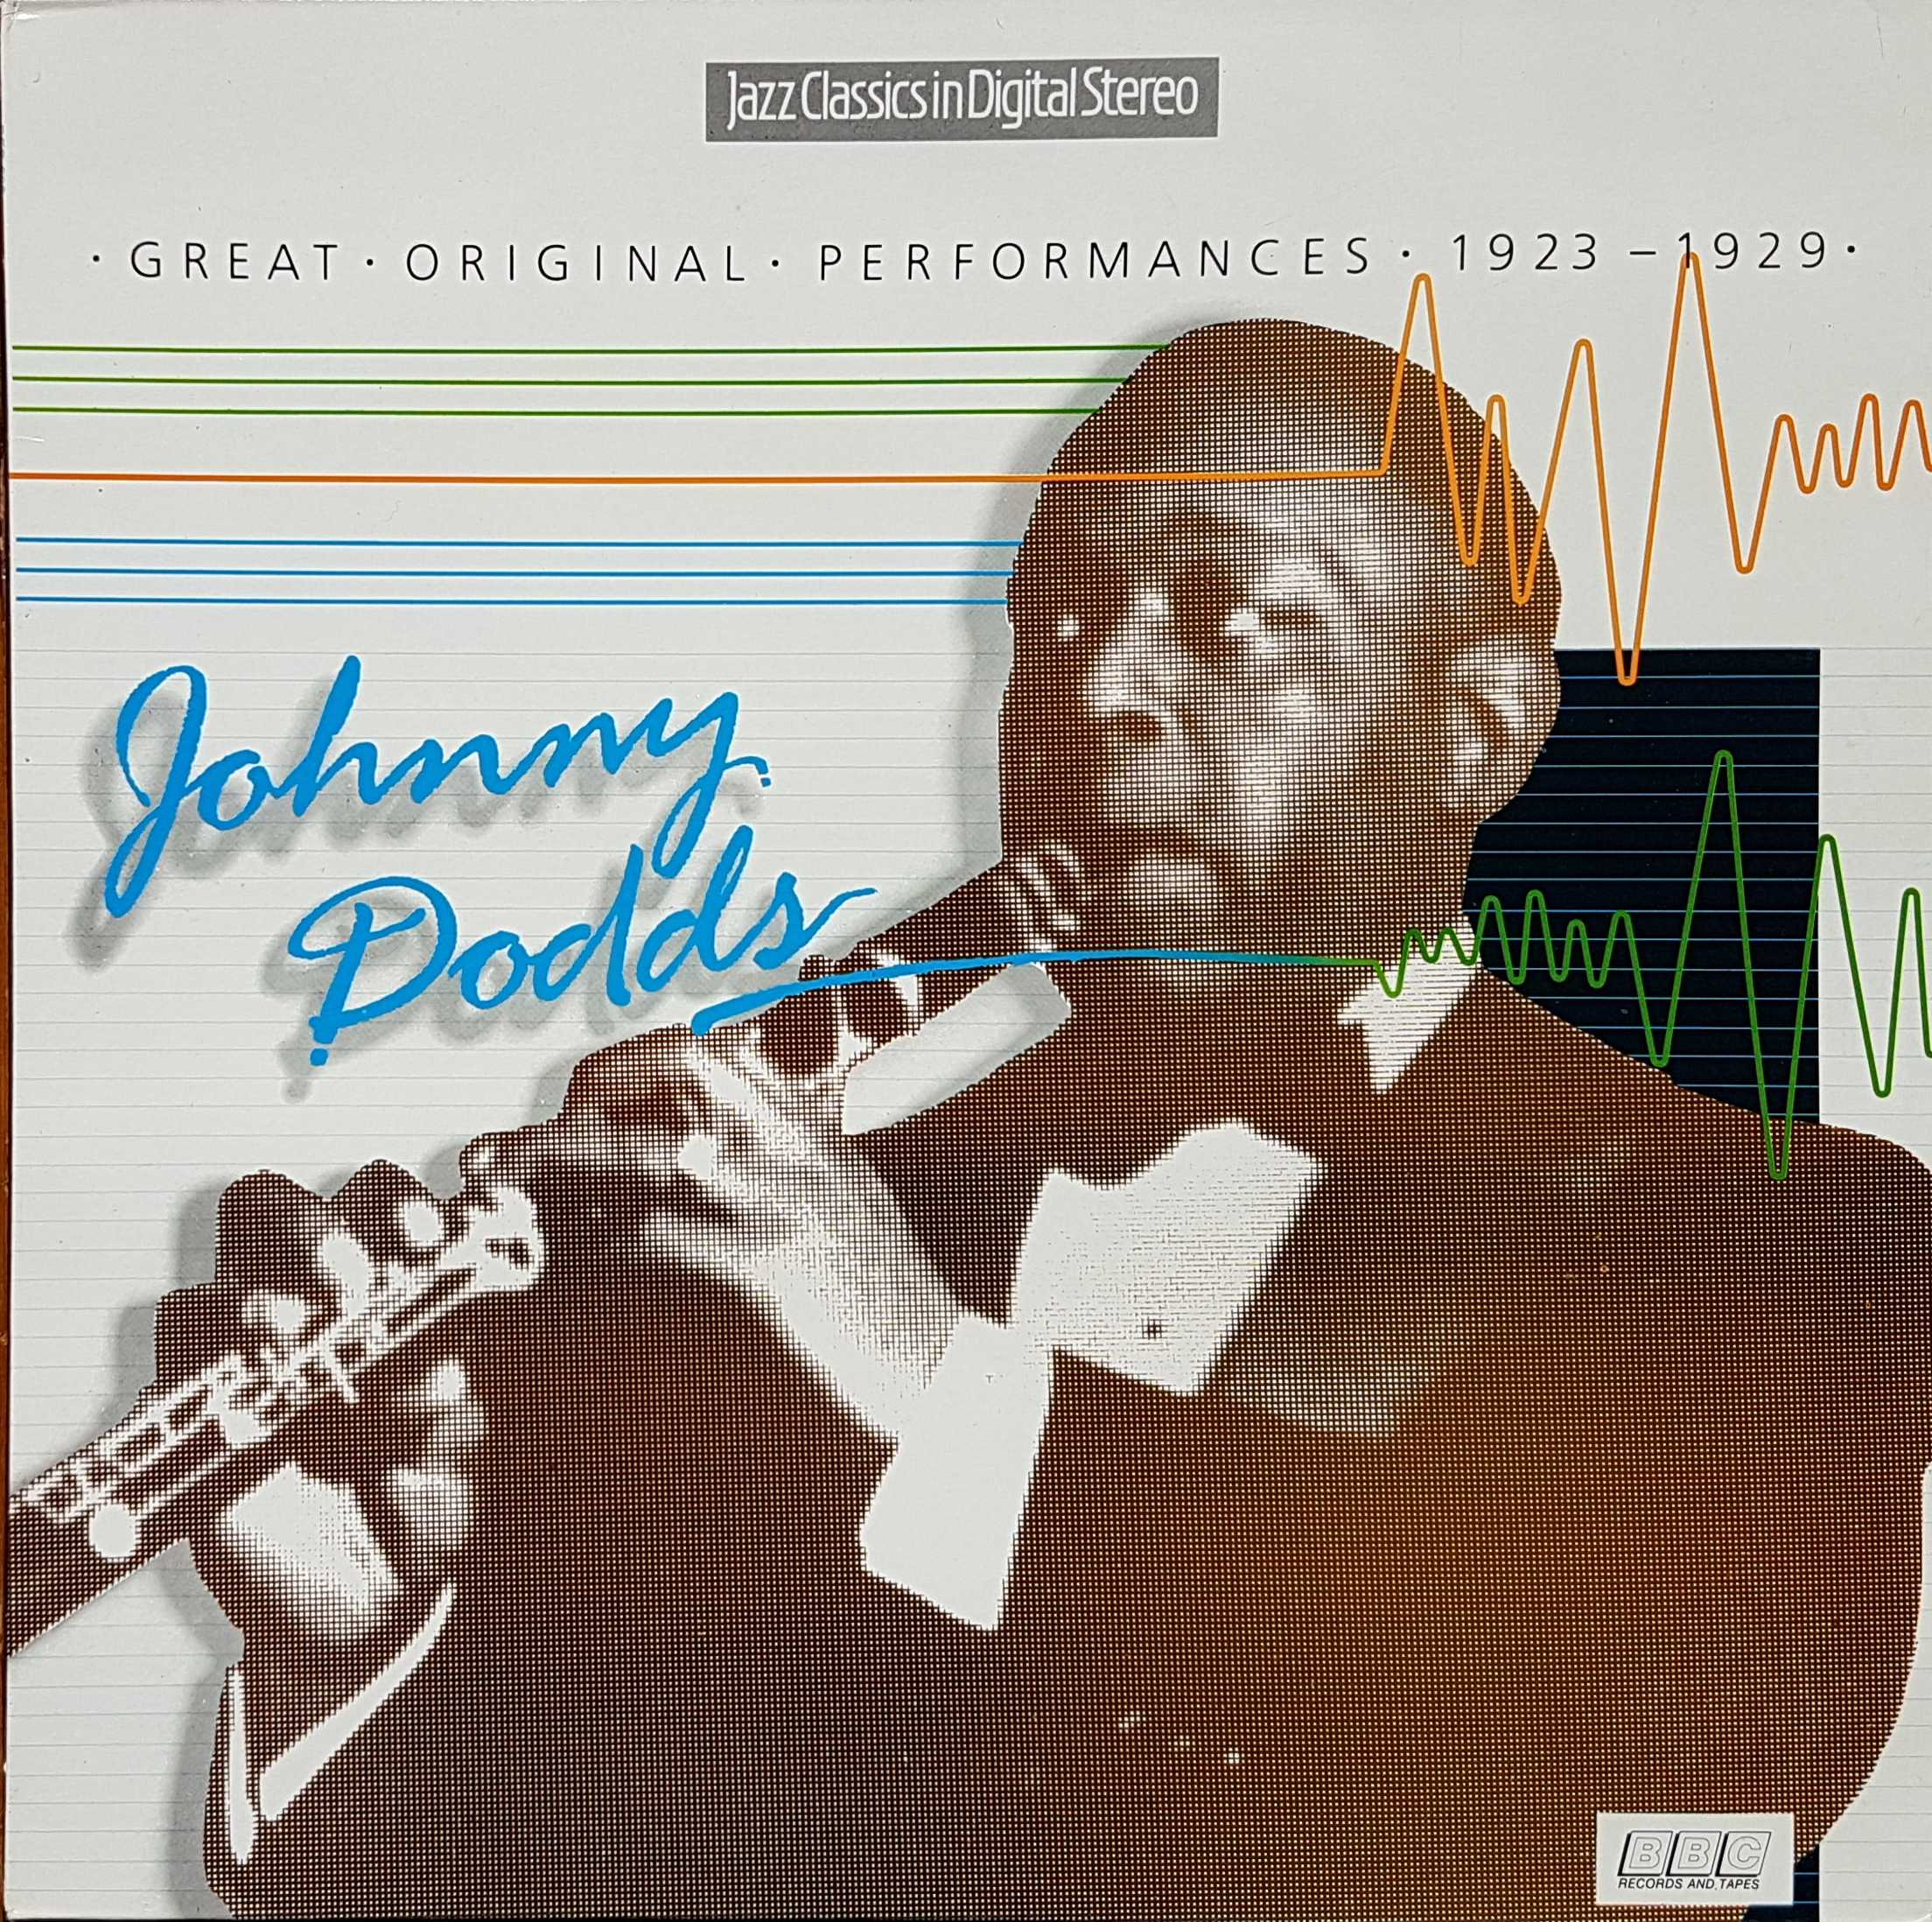 Picture of REB 603 Jazz Classics - Johnny Dodds by artist Johnny Dodds from the BBC albums - Records and Tapes library